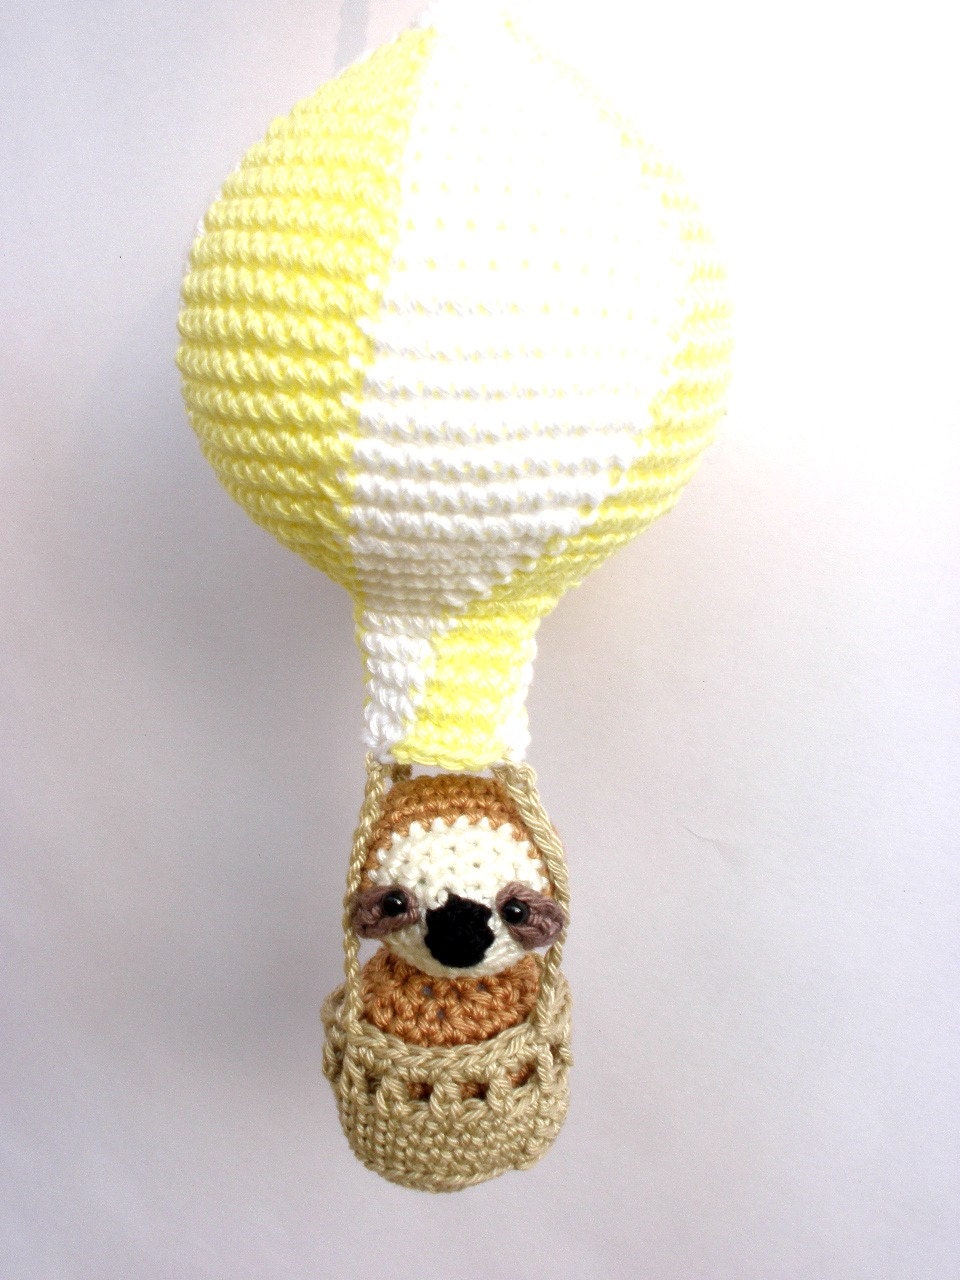 Yellow and gray hot air balloon baby mobile